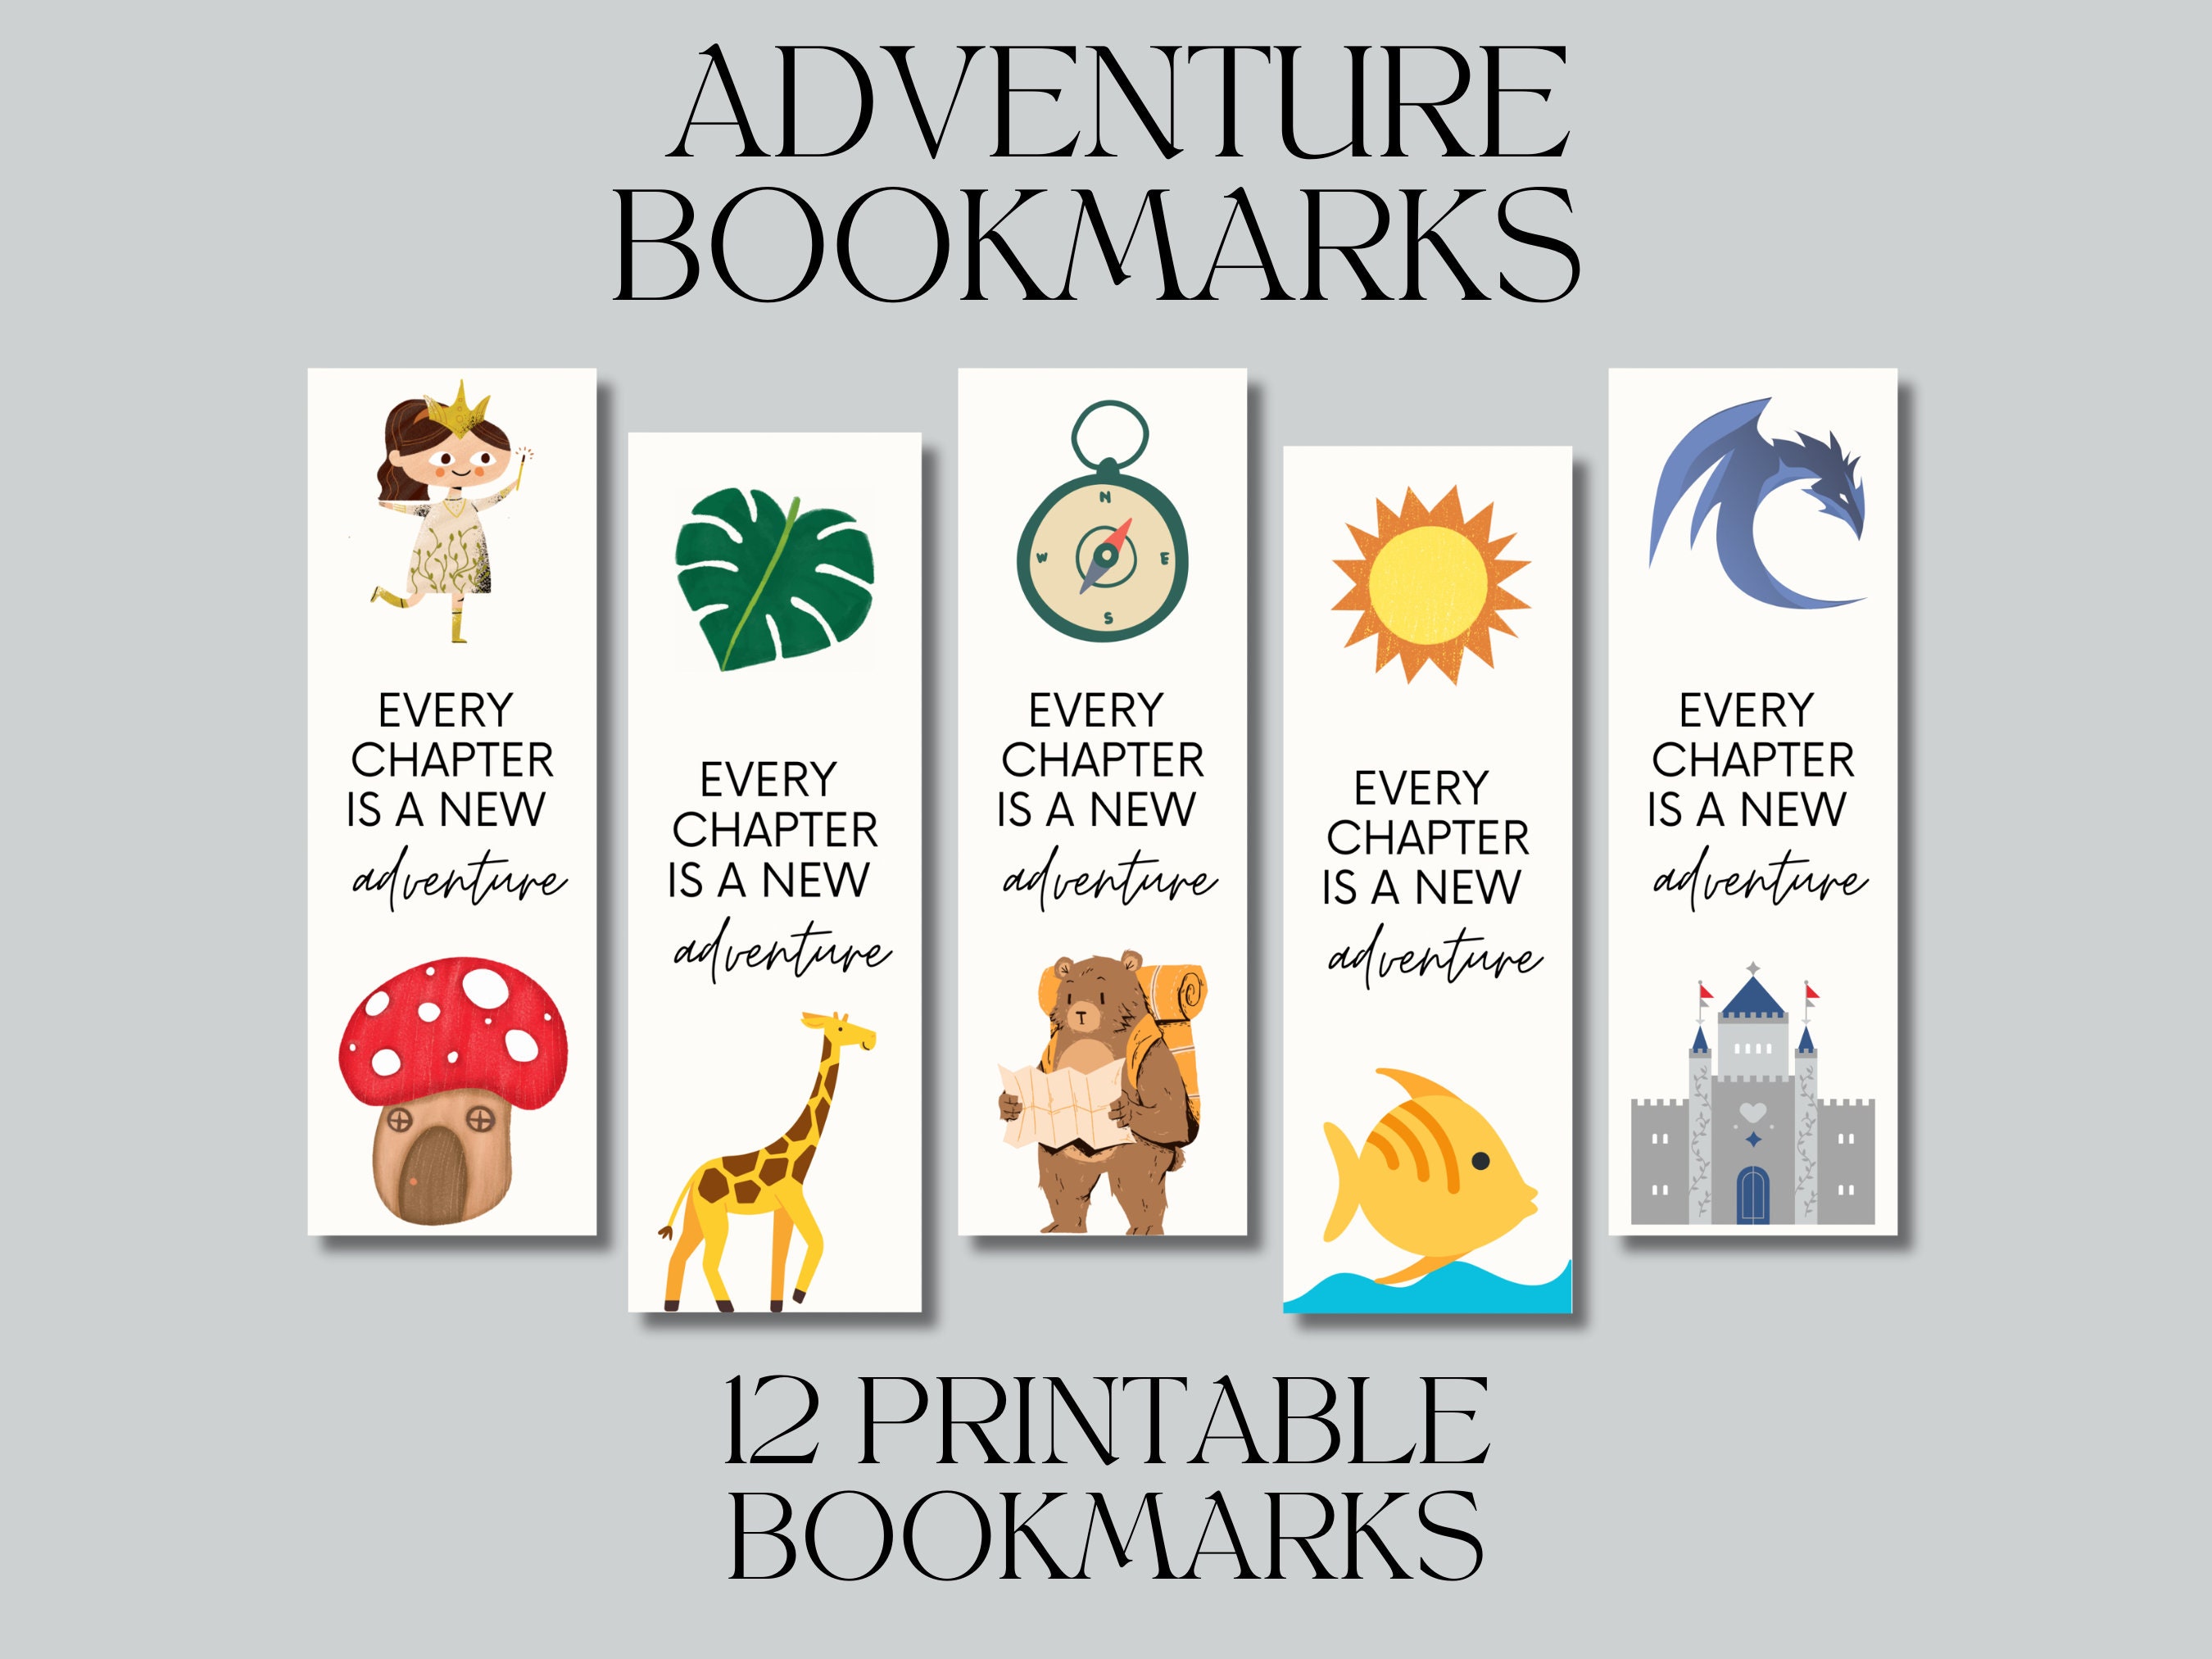 Adventure Bookmarks Every Chapter is A New Adventure image